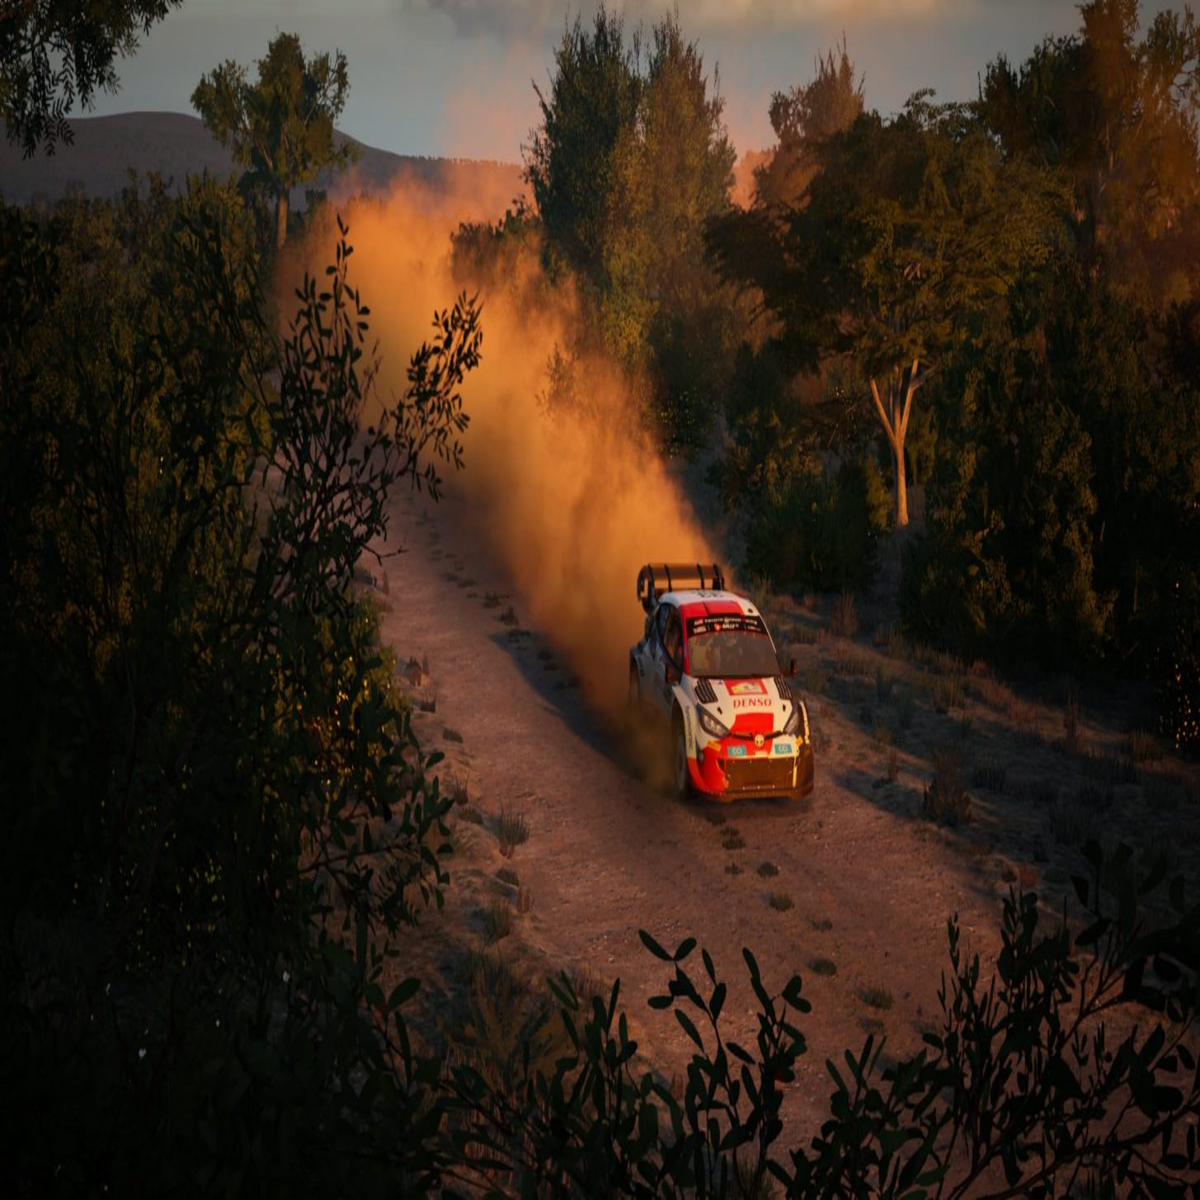 Why EA WRC uses Unreal Engine 5, not EA's Frostbite, and is current-gen  only